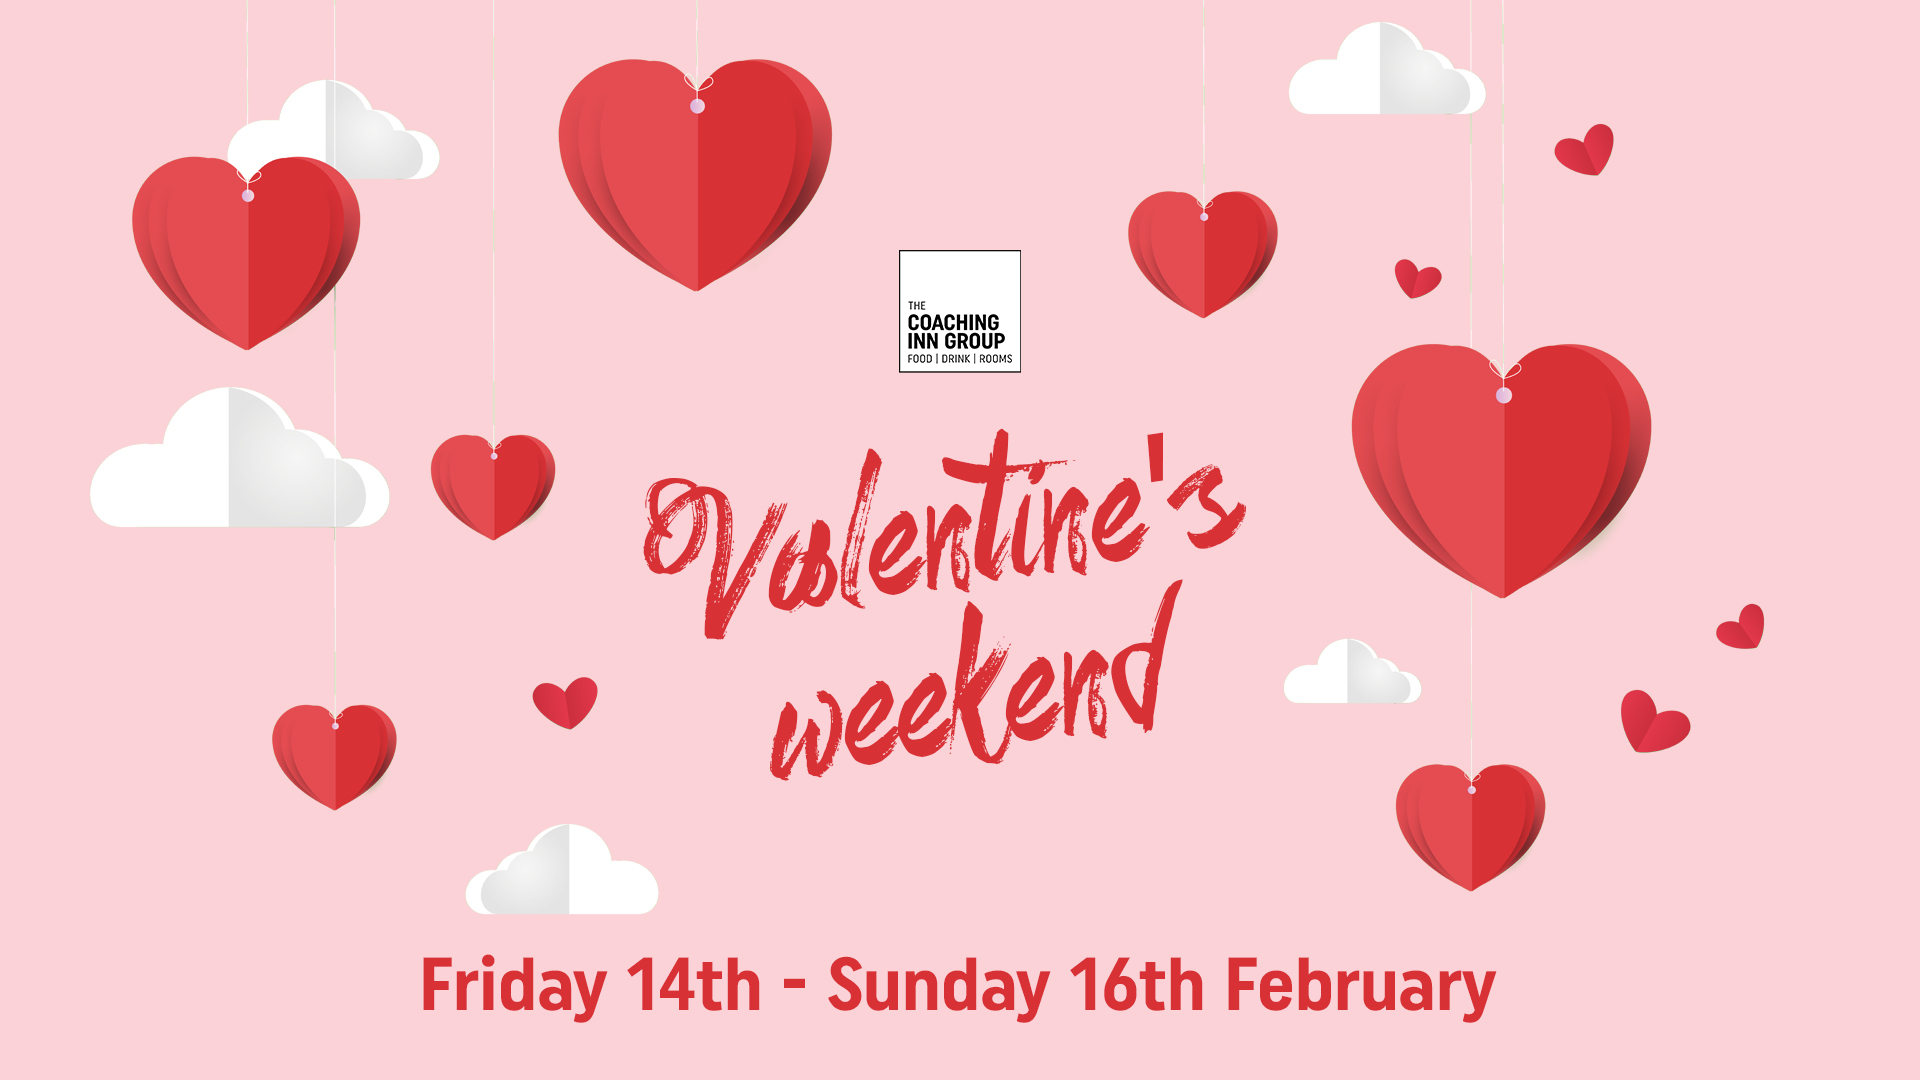 Valentines Weekend Packages The Golden Lion Hotel, Eatery and Coffee